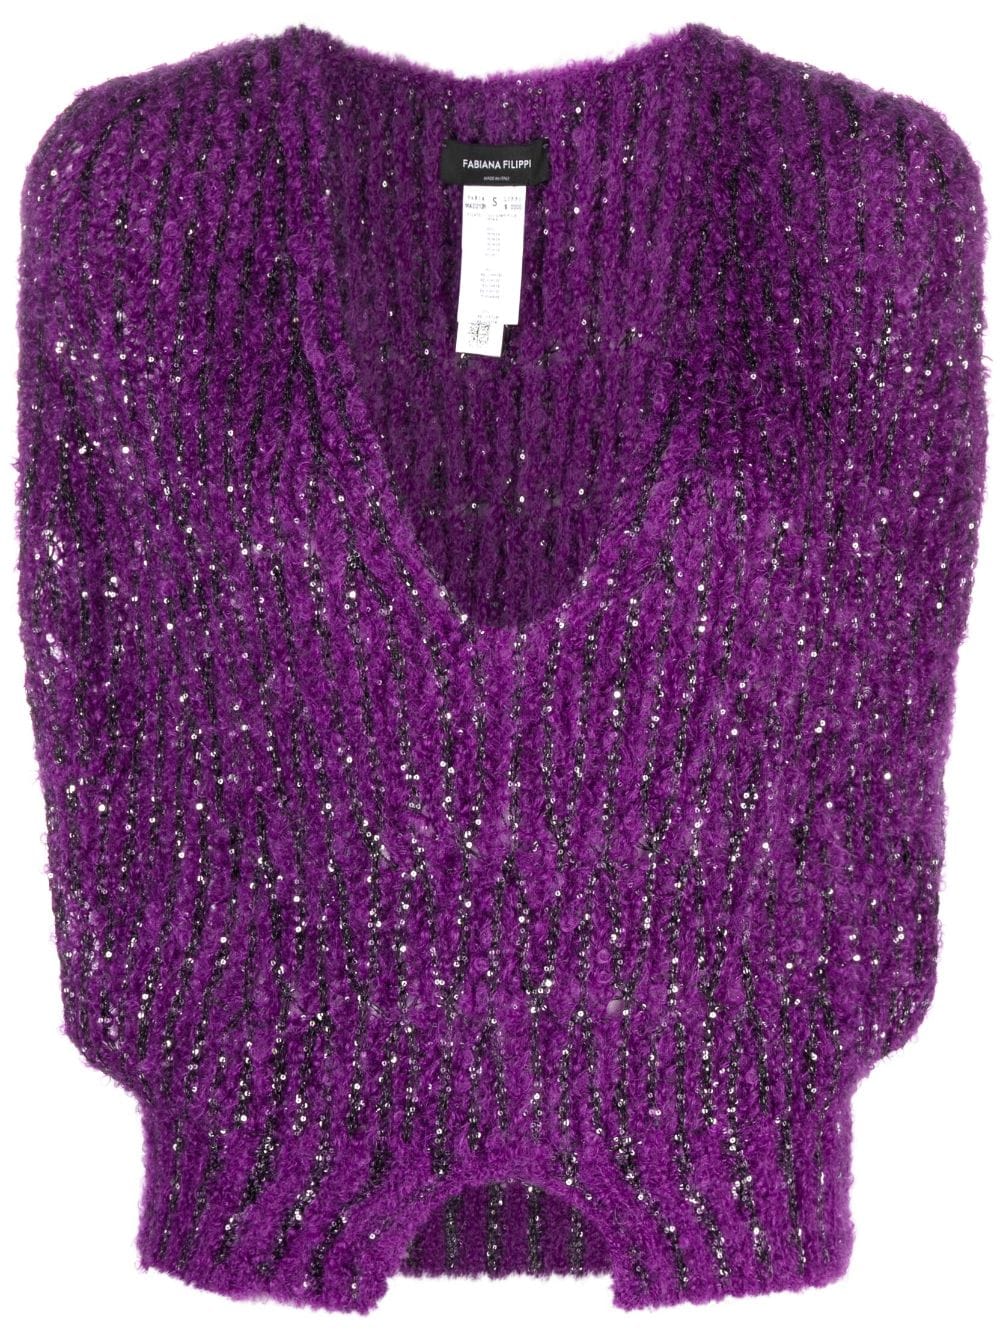 Fabiana Filippi sequin-embellished Knitted Top - Farfetch